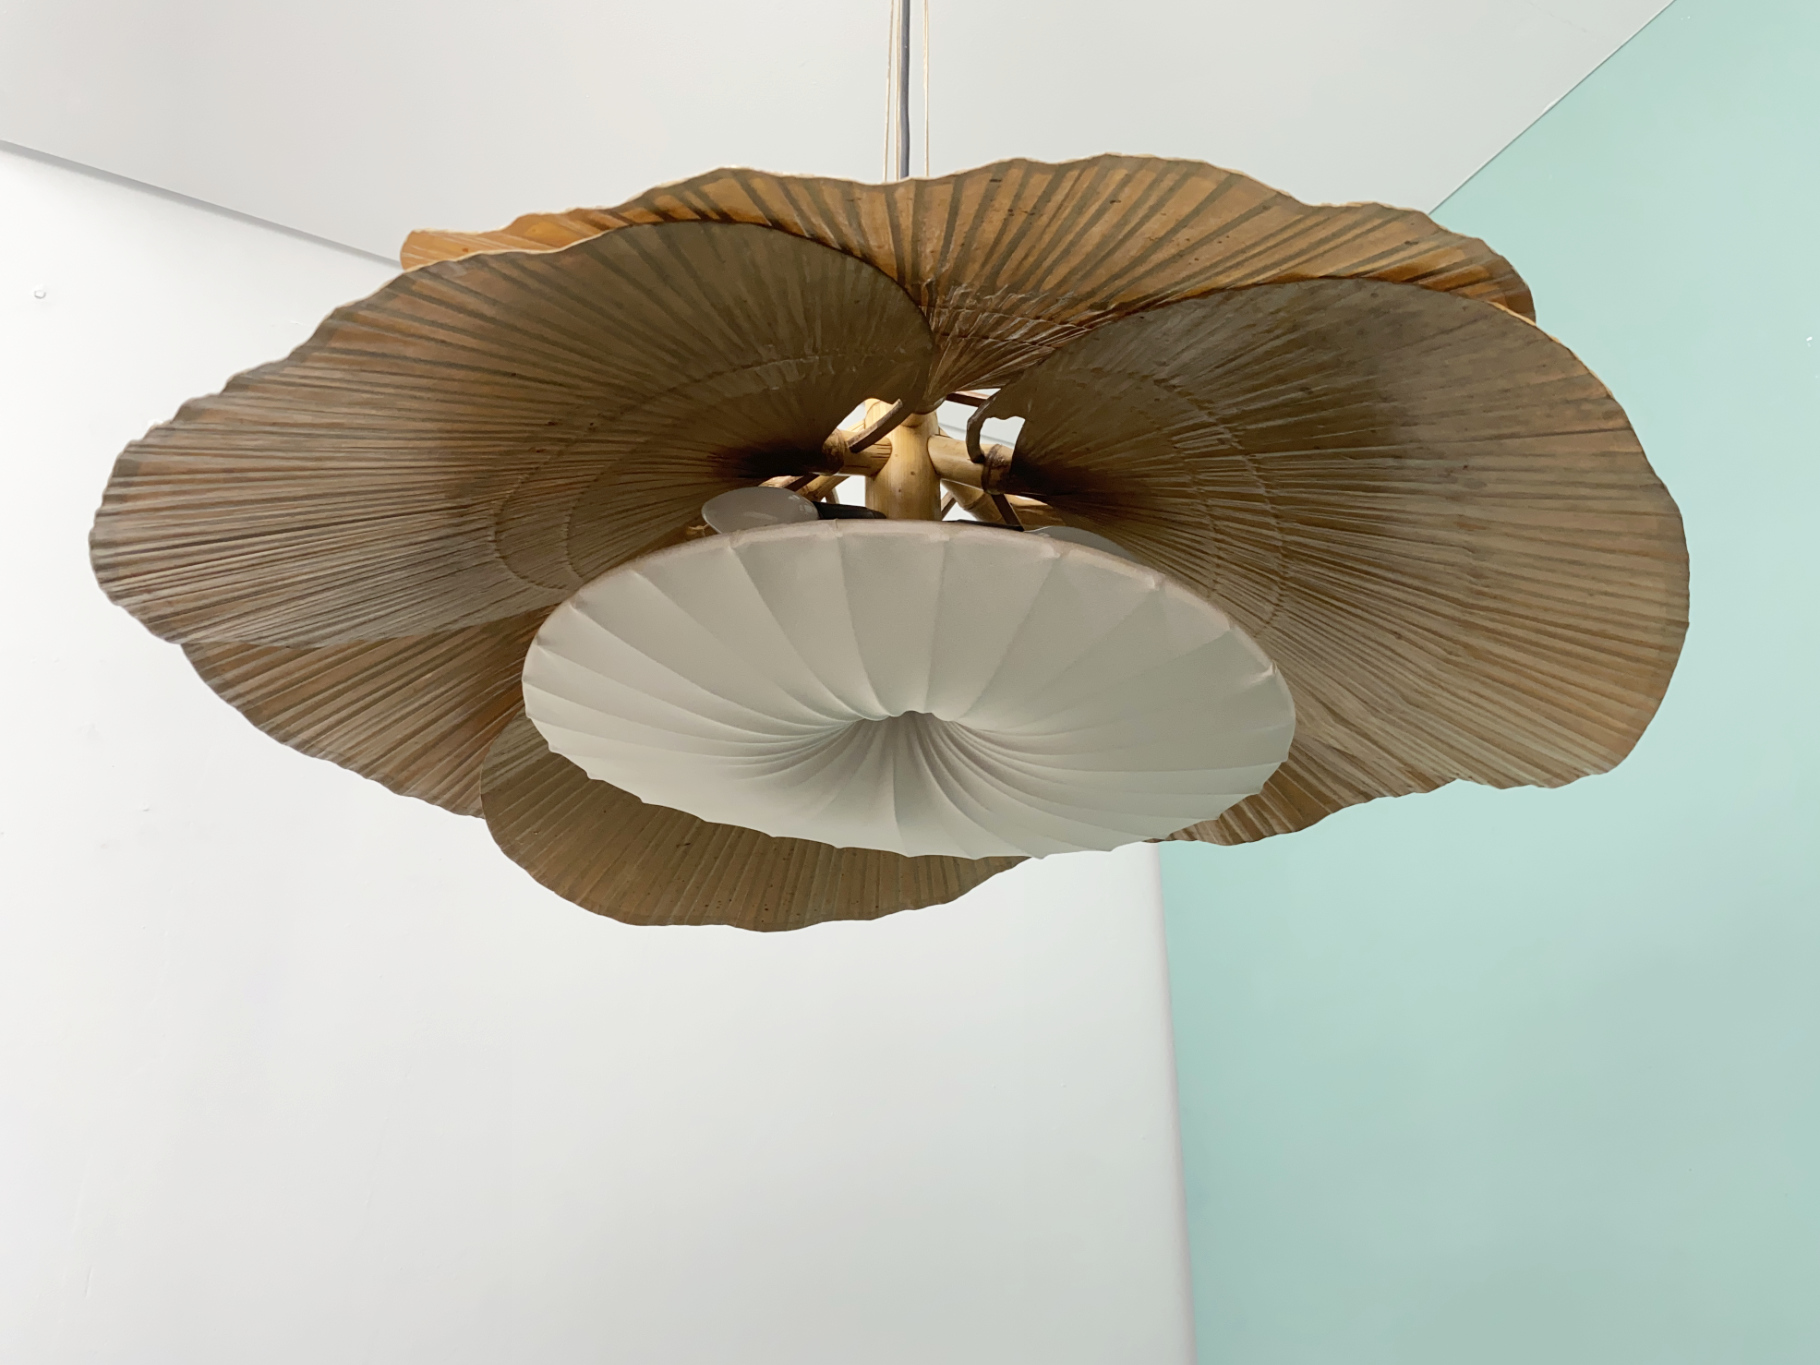 “SOLD” Hana I Uchiwa Series Bamboo Chandelier with 6 Leaves by Ingo Maurer, Design M, Germany, 1970s